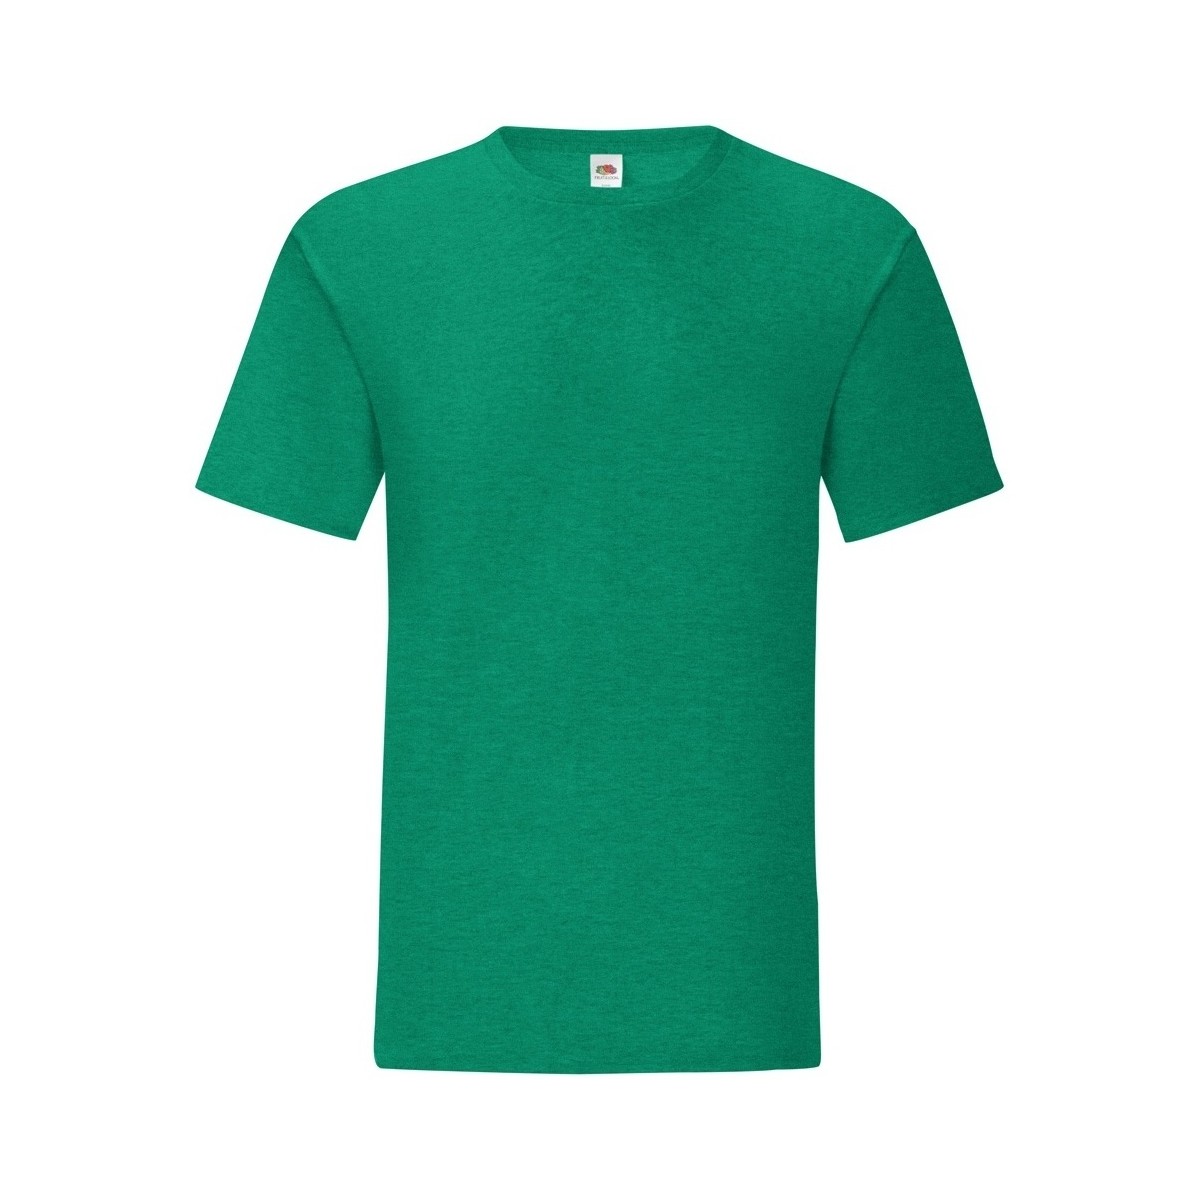 Vêtements Homme T-shirts Logo-Print manches longues Fruit Of The Loom Iconic 150 Vert